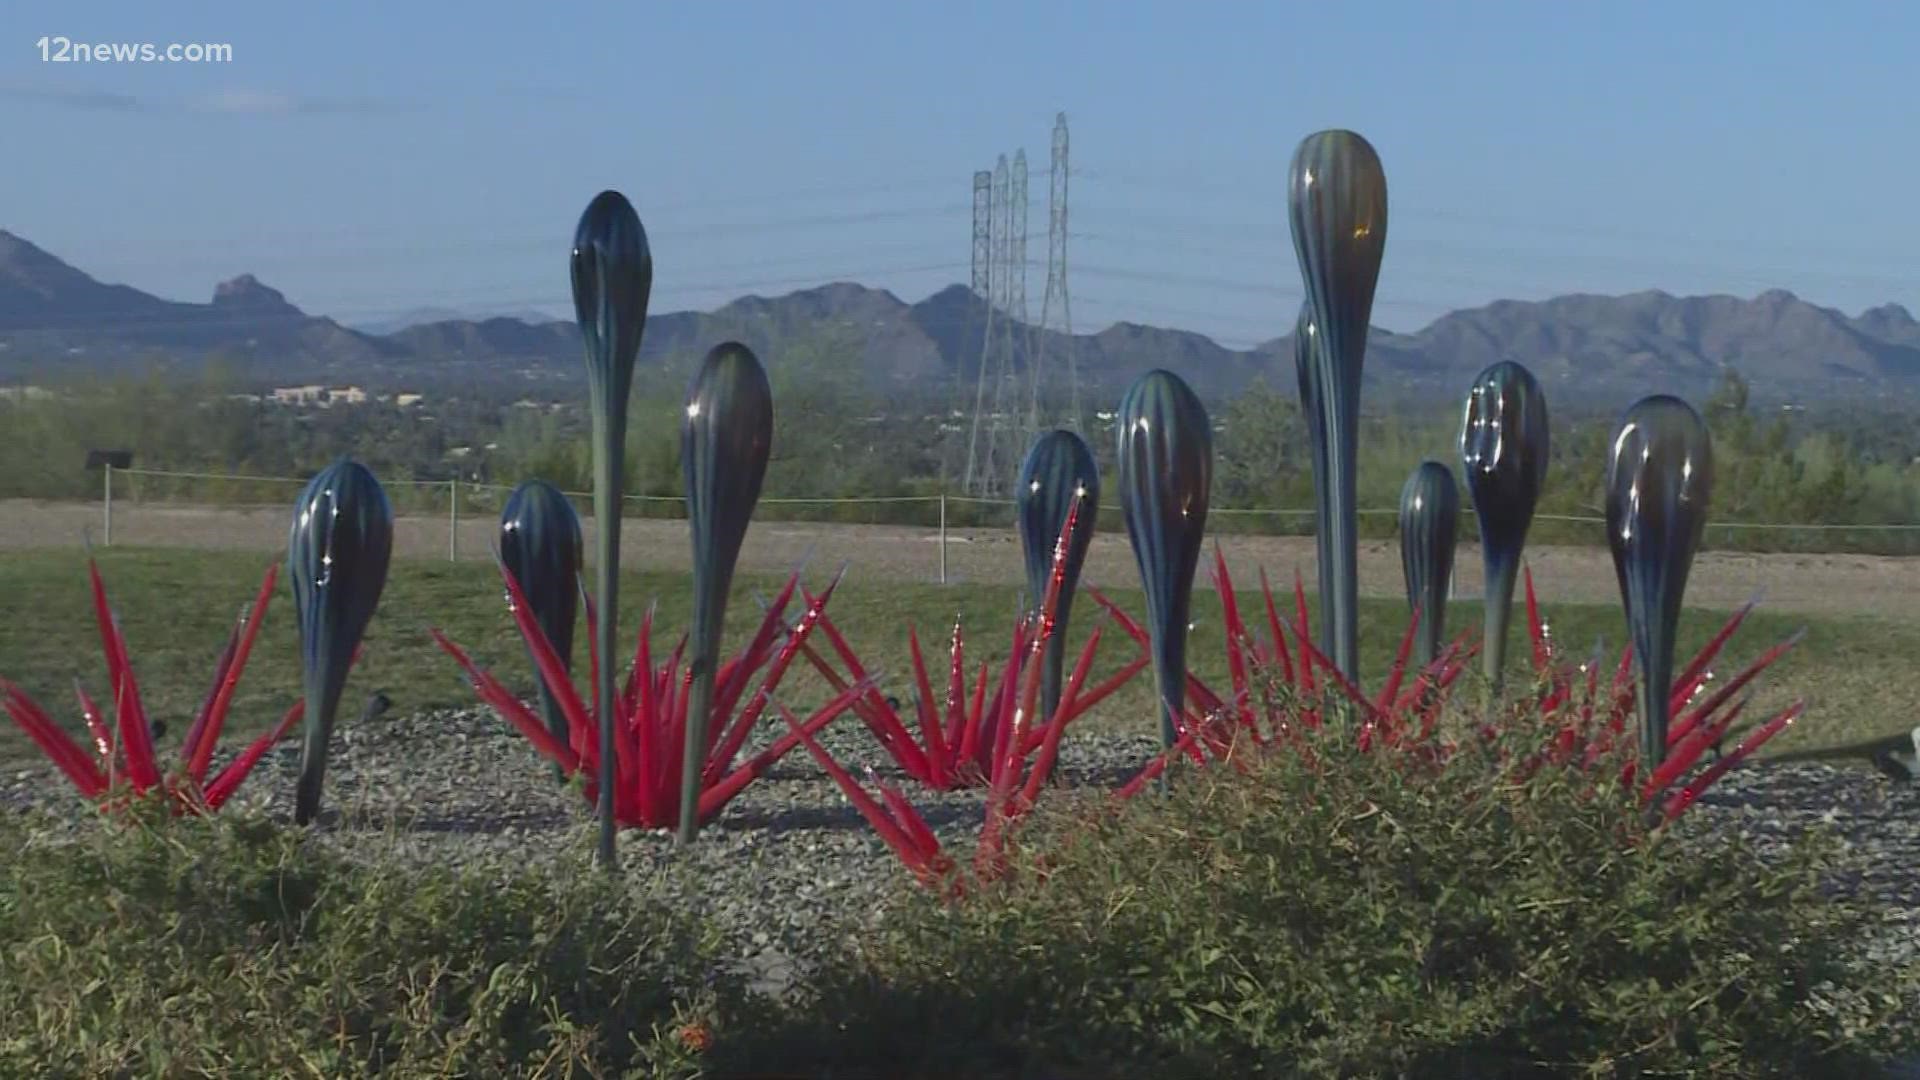 The Chihuly exhibit at Taliesin West in Scottsdale has been opened since December and will continue until Father's Day.